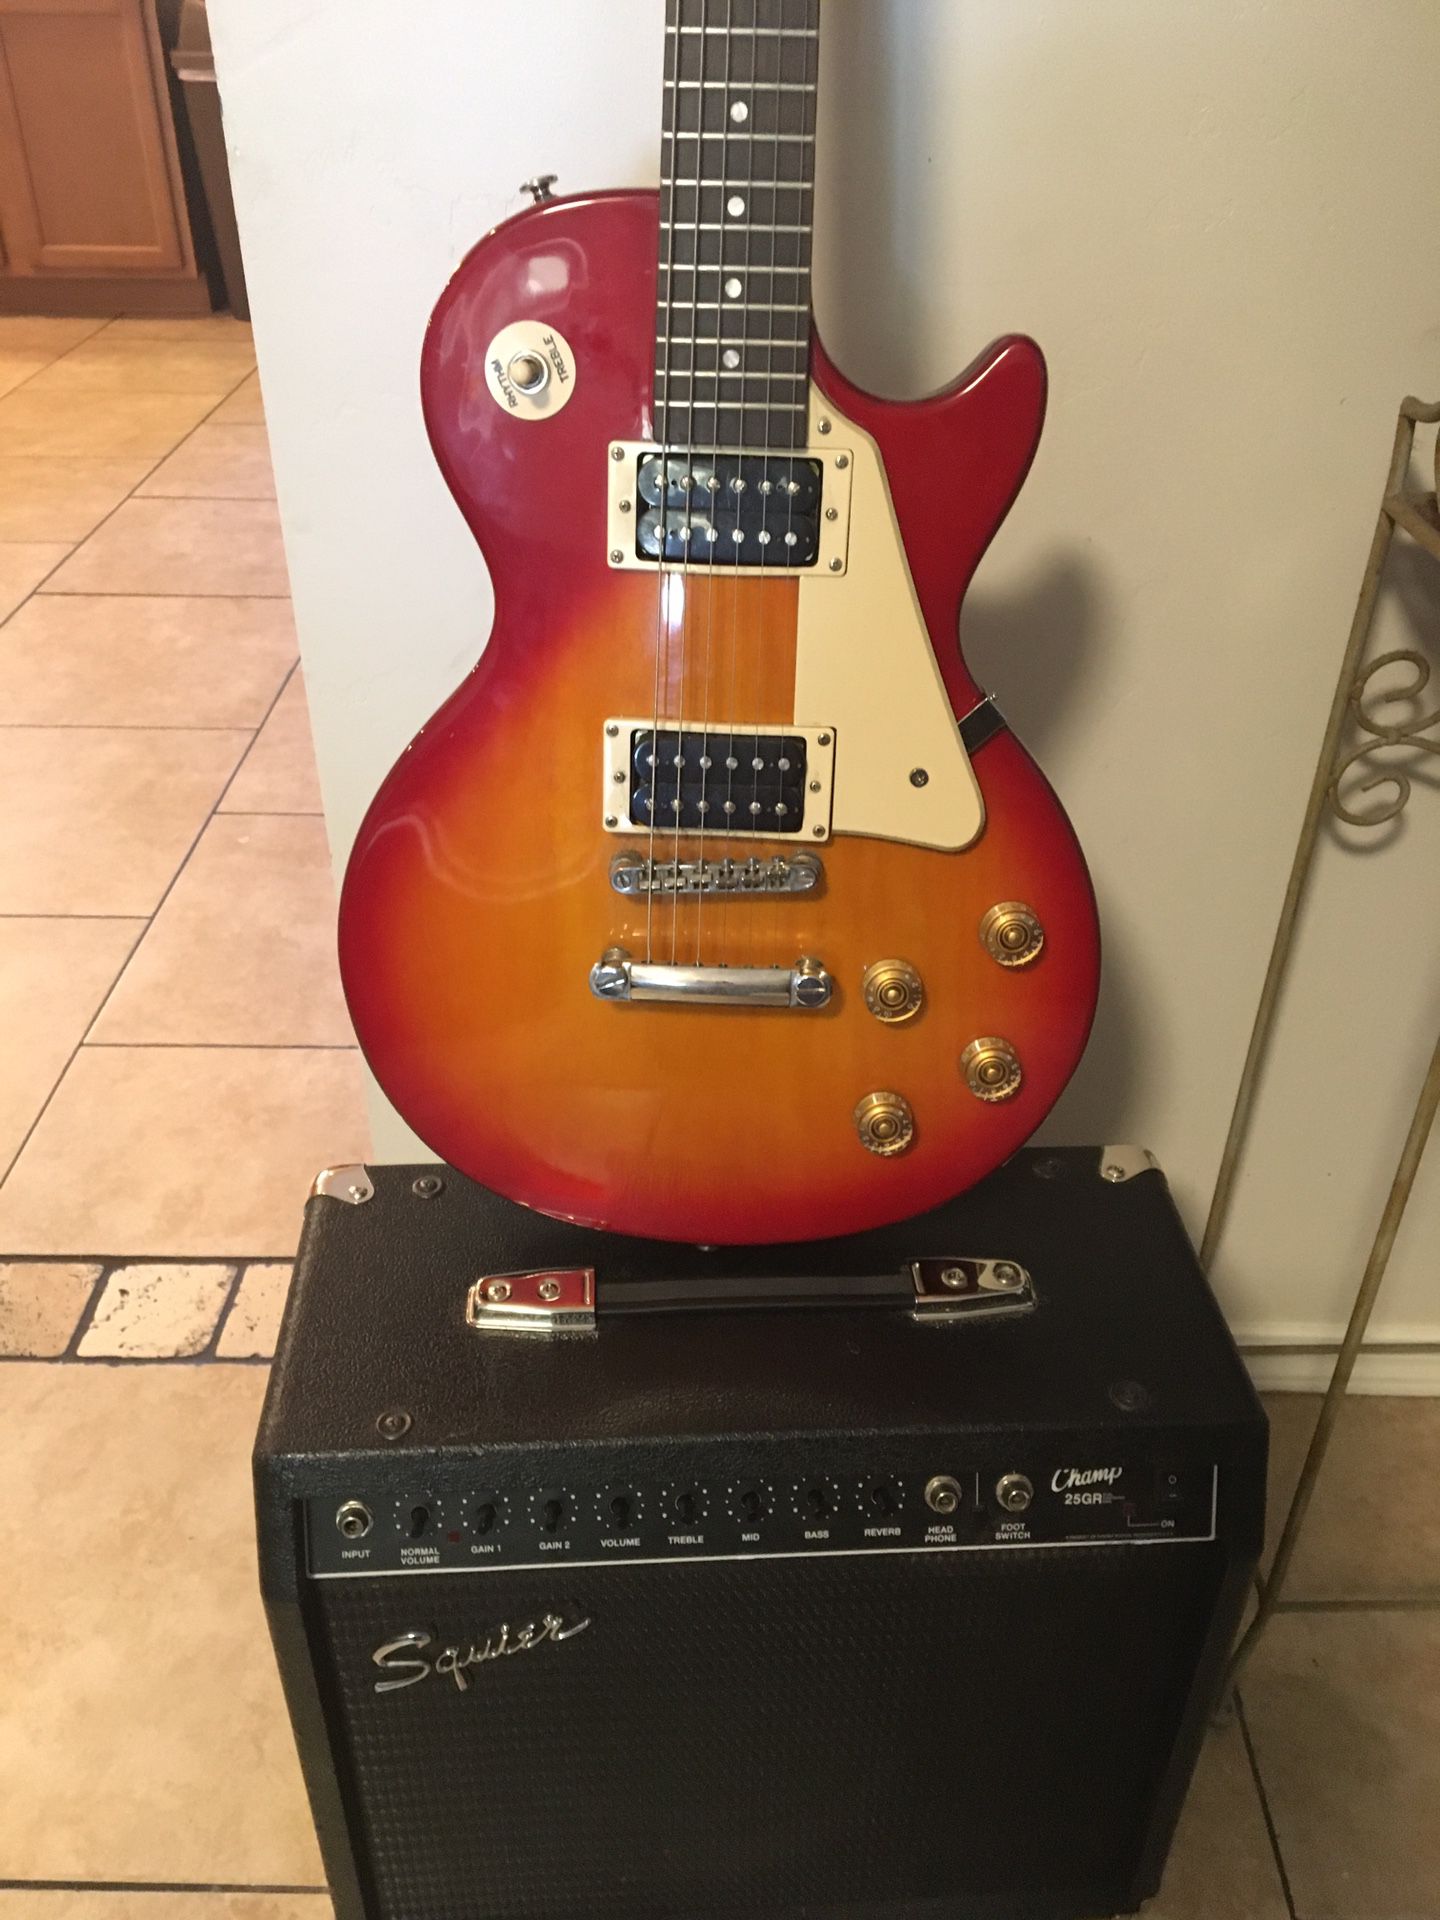 Epiphanies Les Paul 100 and Squier-champ 25GR Amp